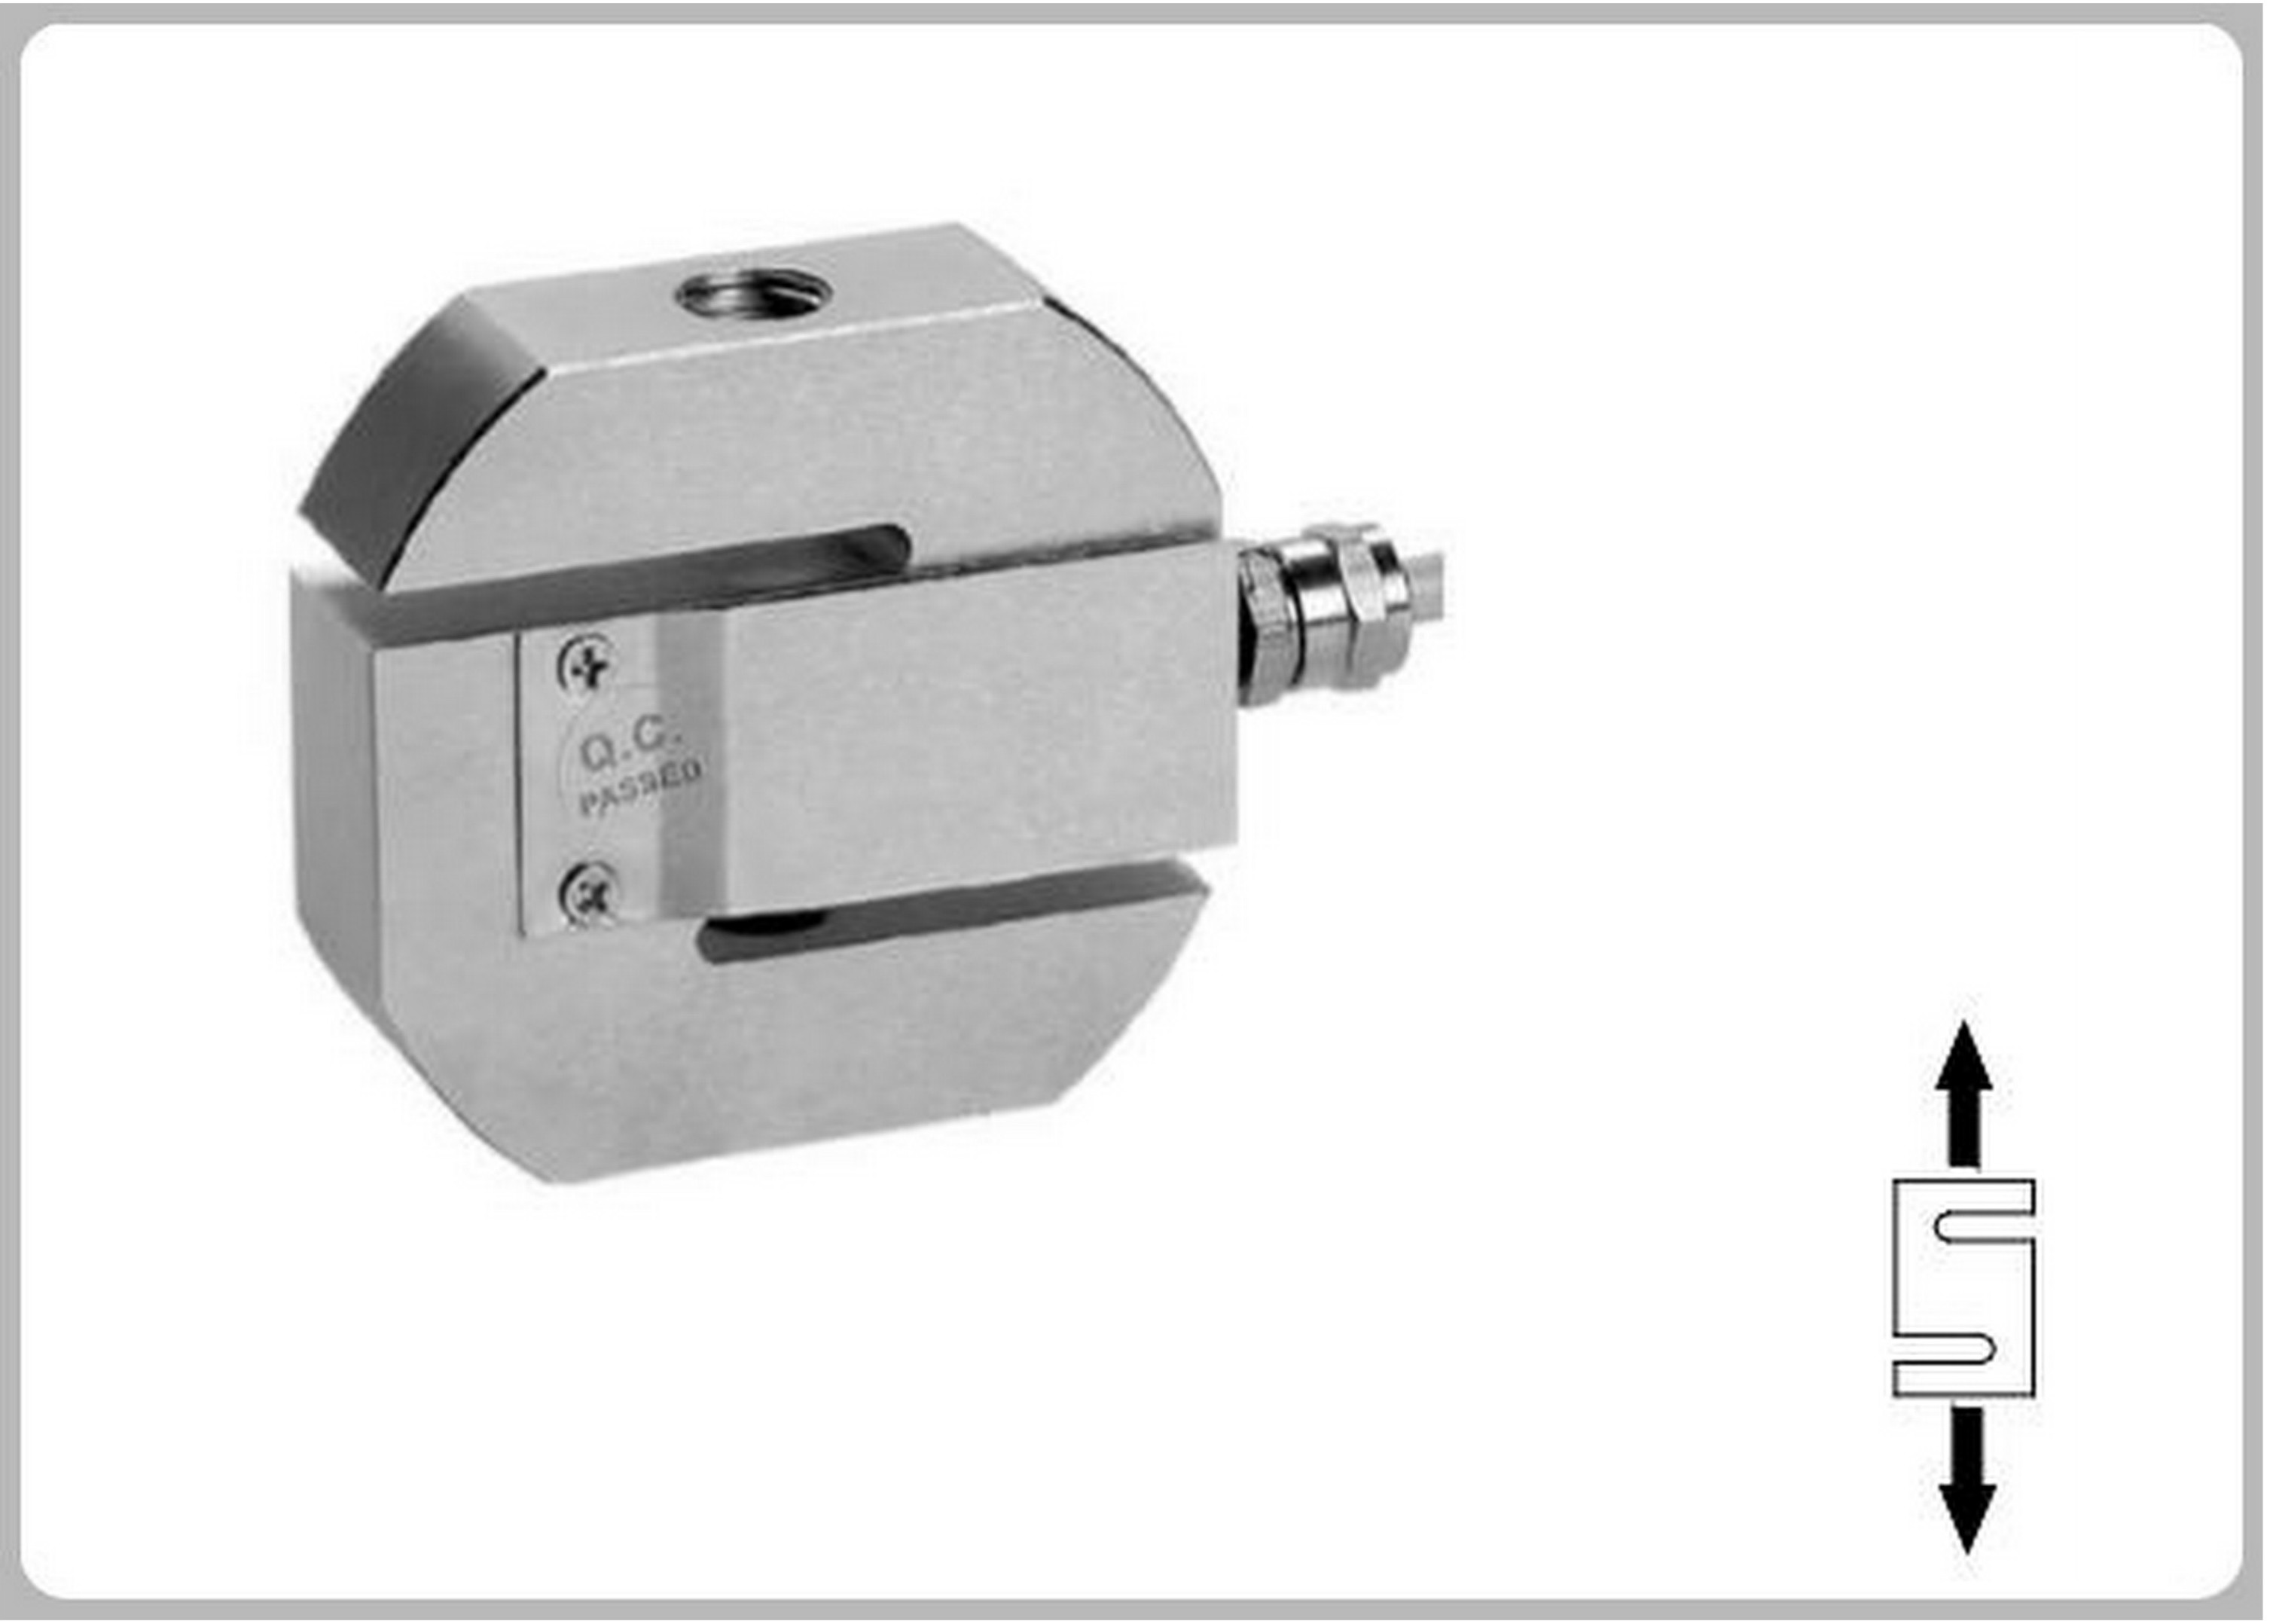 MC8114 LOAD CELL & FORCE TRANSDUCER